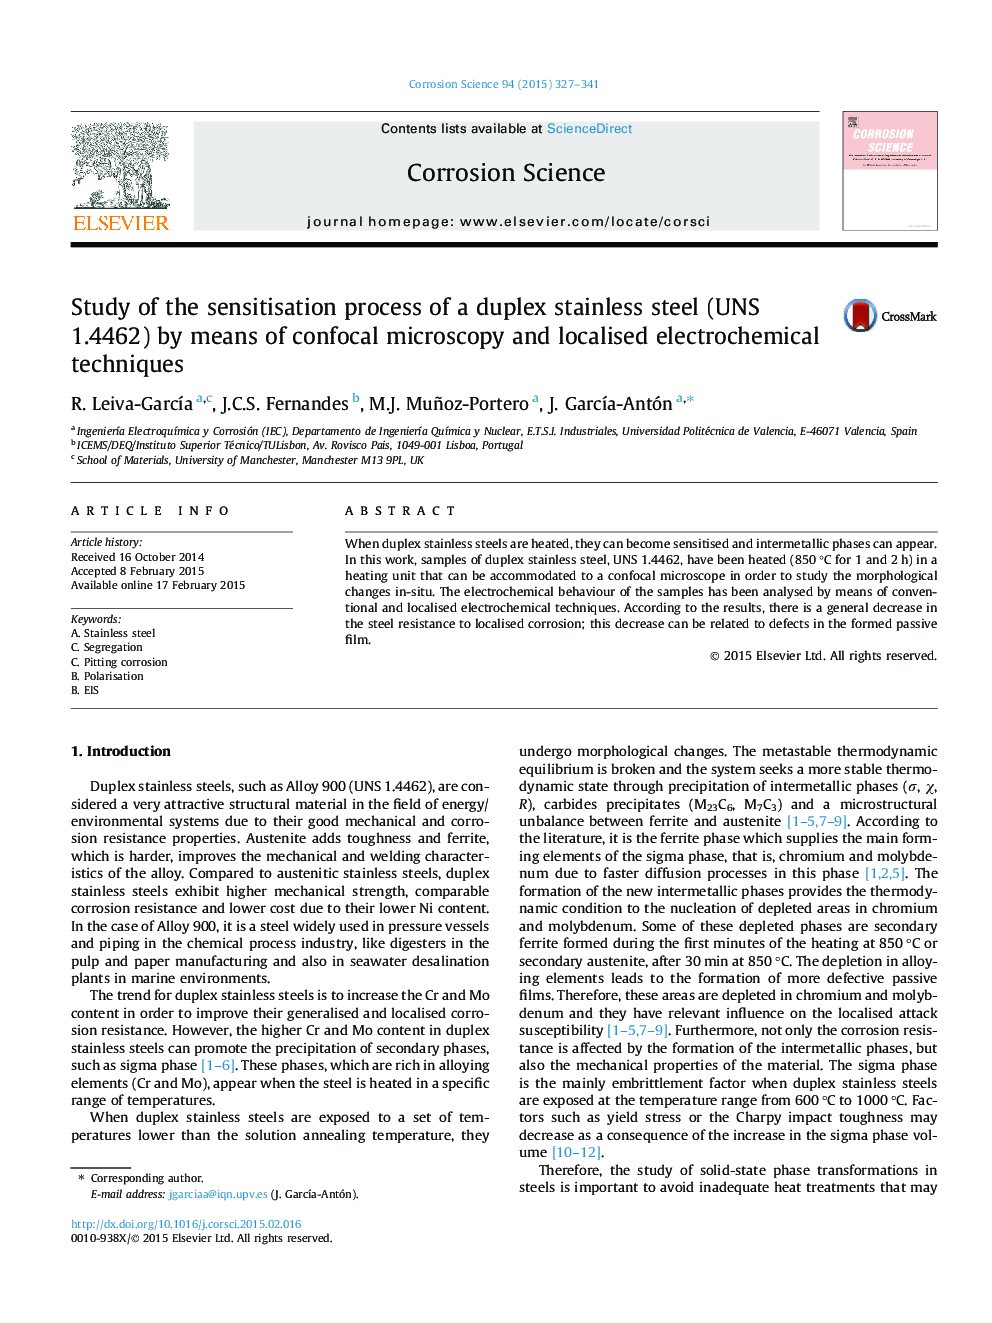 Study of the sensitisation process of a duplex stainless steel (UNS 1.4462) by means of confocal microscopy and localised electrochemical techniques